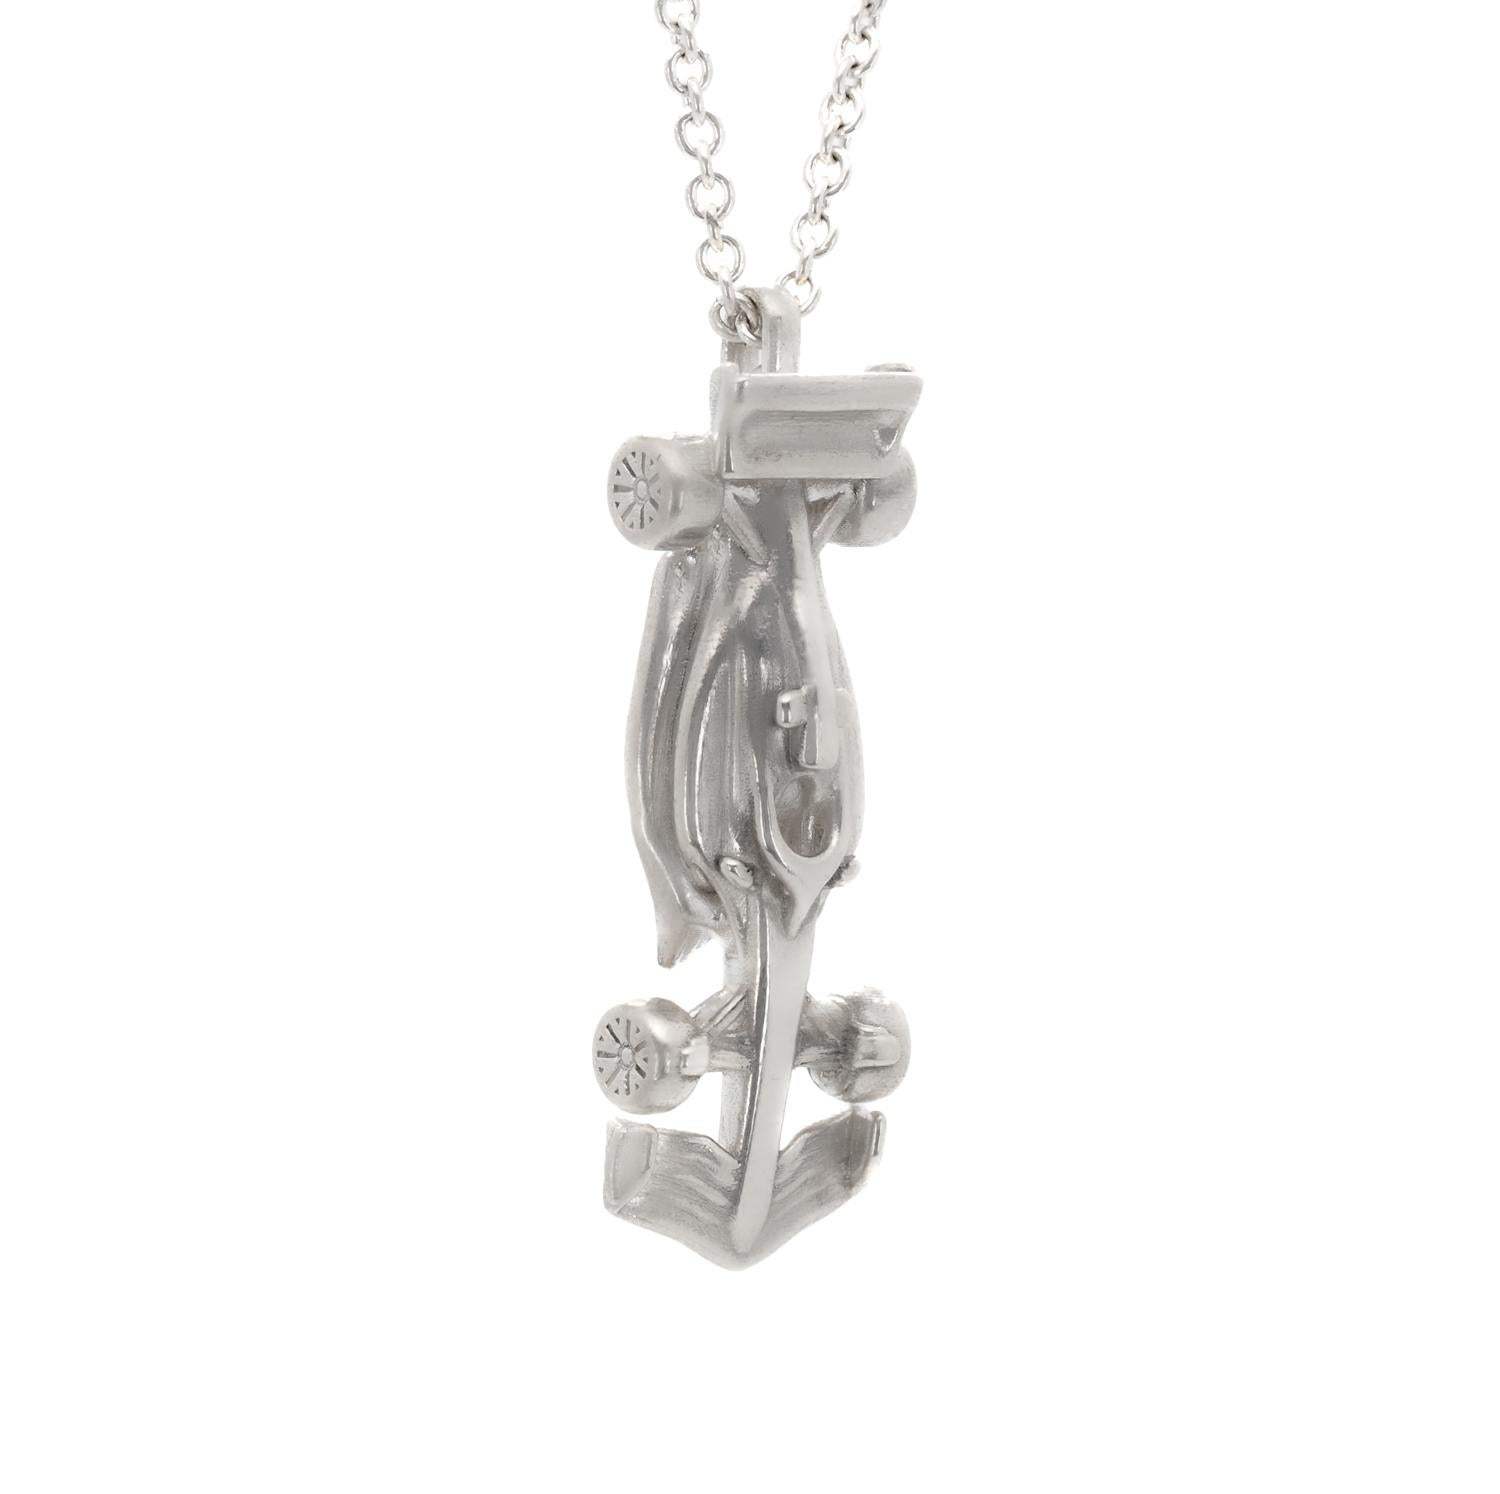 The Race Car Necklace is a stunning piece that captures the essence of speed and adrenaline. Crafted from sterling silver, this necklace features a sleek and aerodynamic race car design complete with intricate details. The streamlined body of the